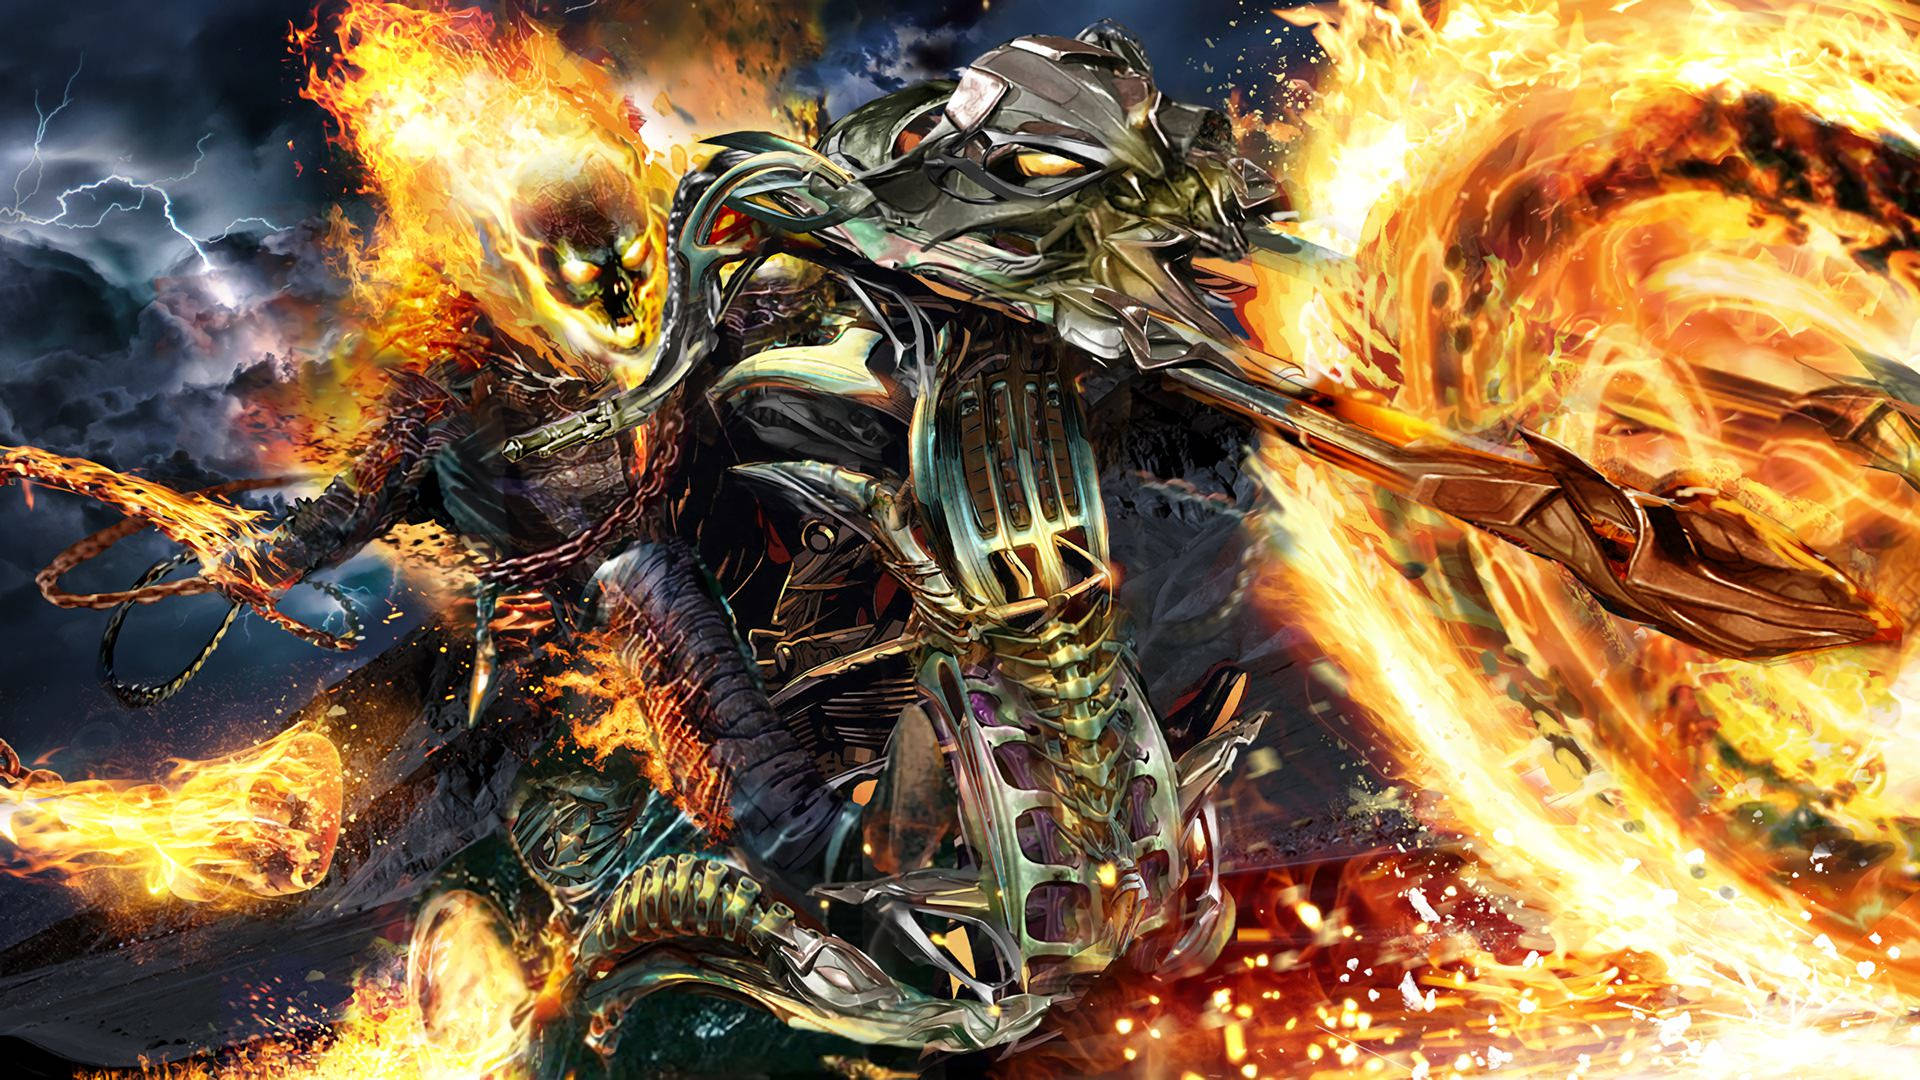 Download Hell King Ghost Rider Wallpaper 